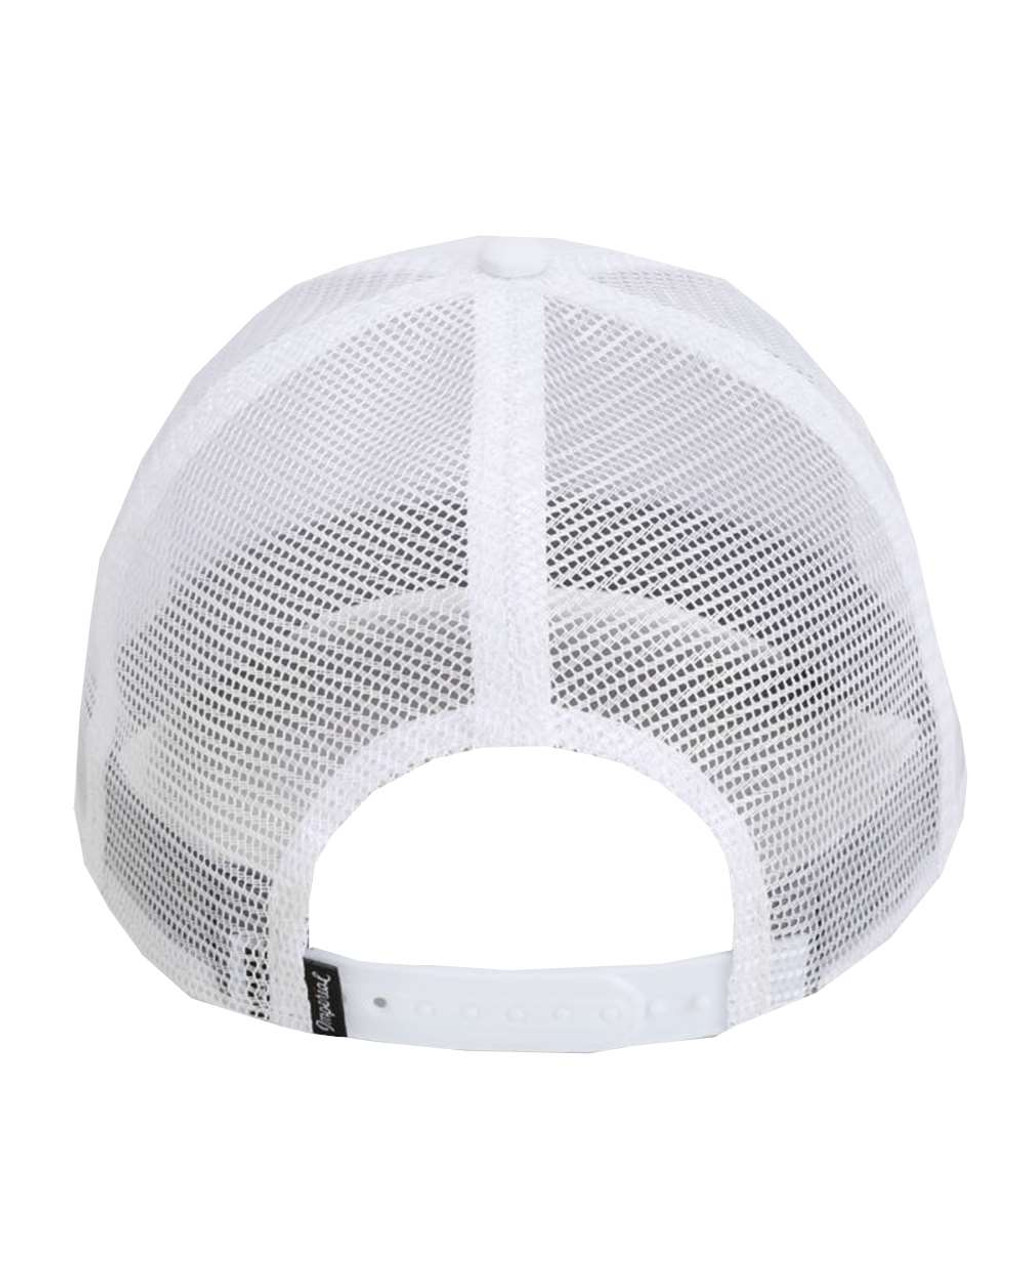 The Night Owl Performance Rope Cap - 7055 Grey/ White Back